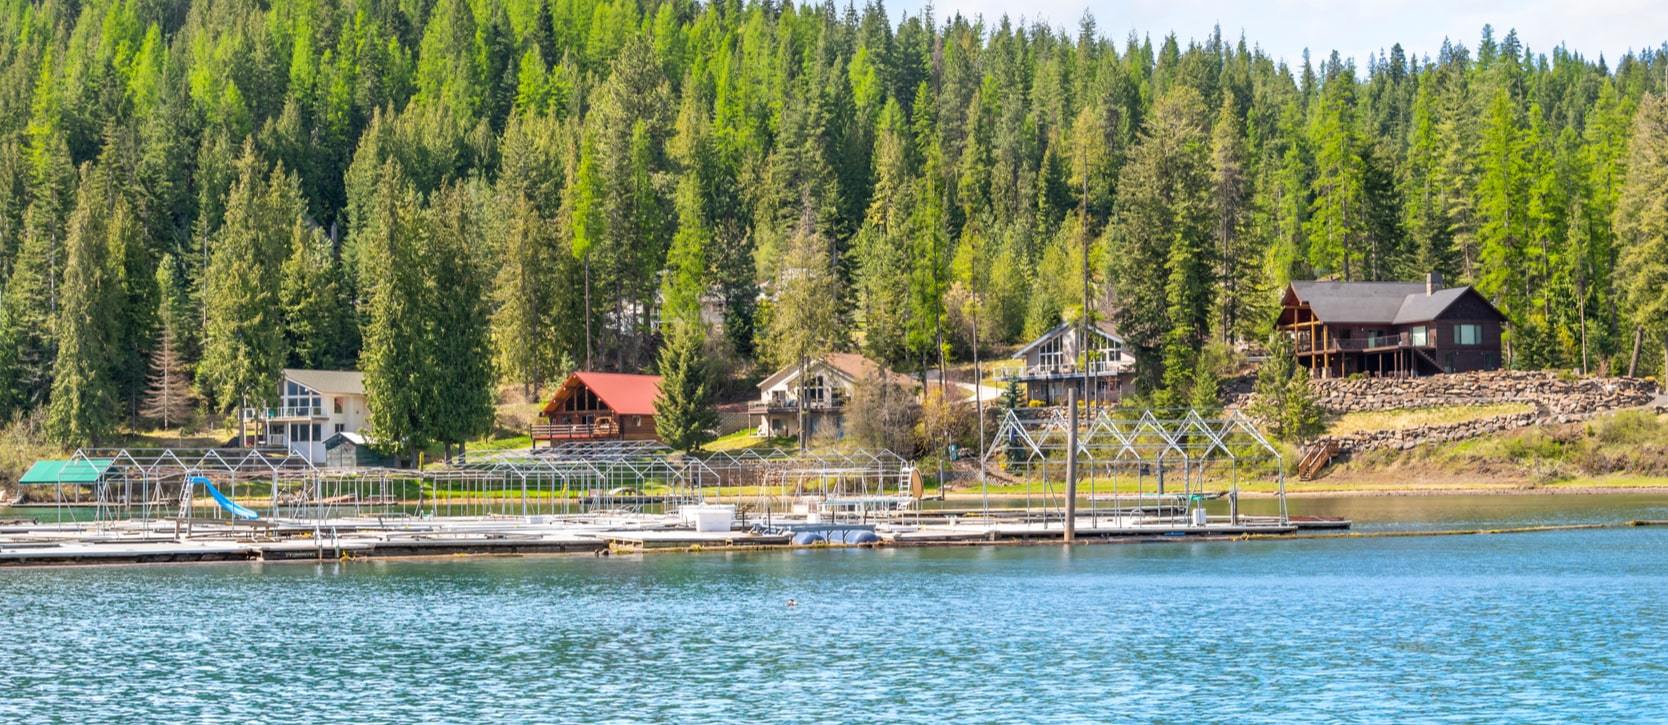 Houses on the lake with a forest backdrop near The Club At Black Rock in Coeur d'Alene